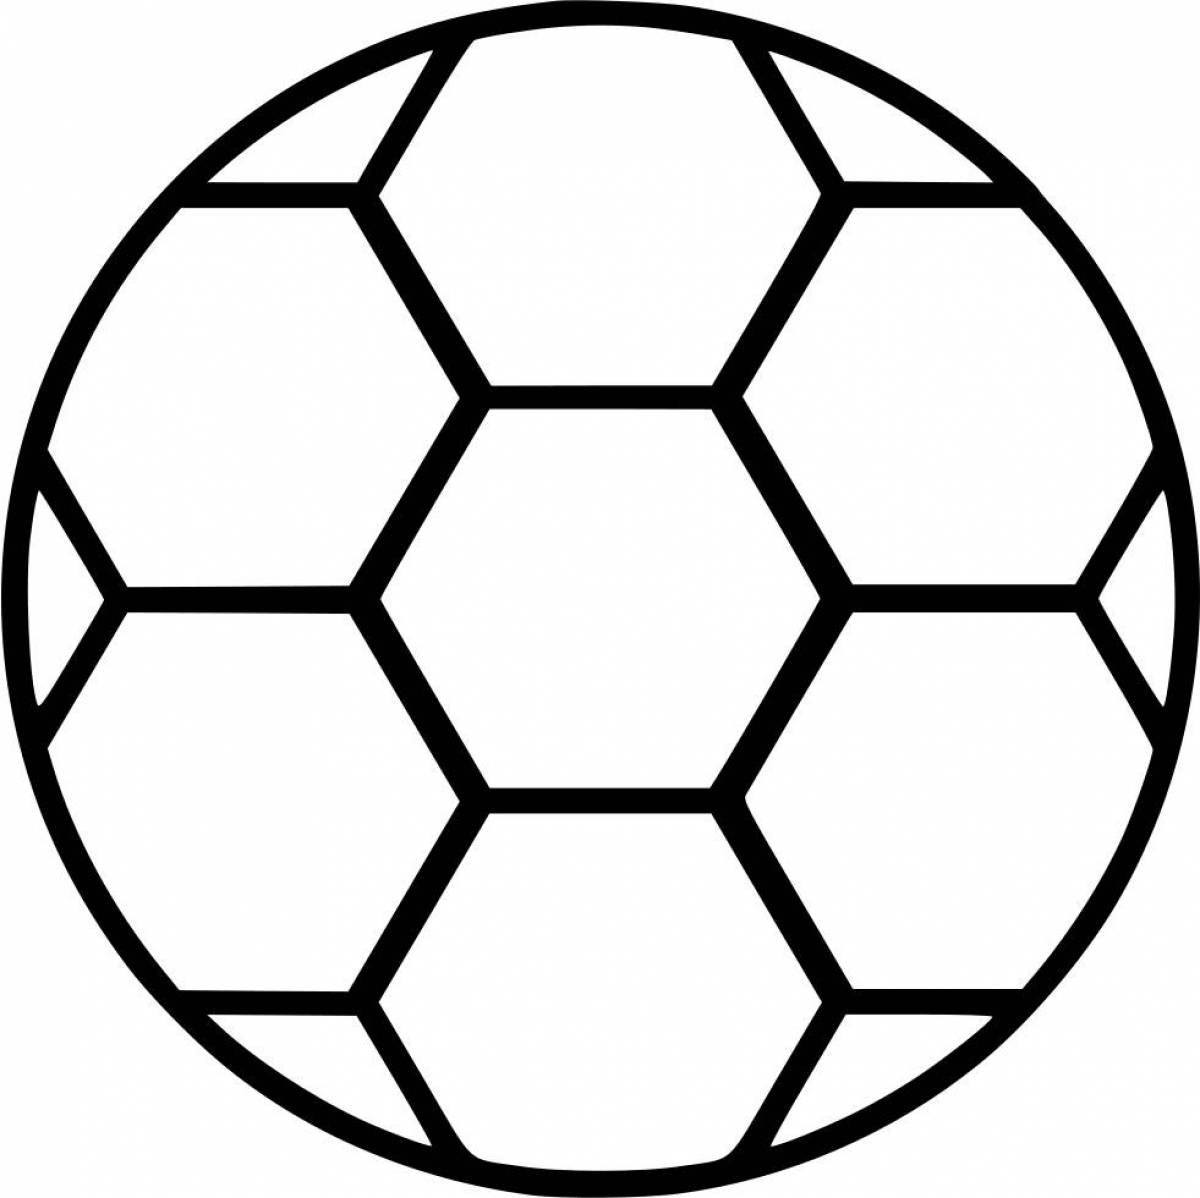 Coloring page shining soccer ball